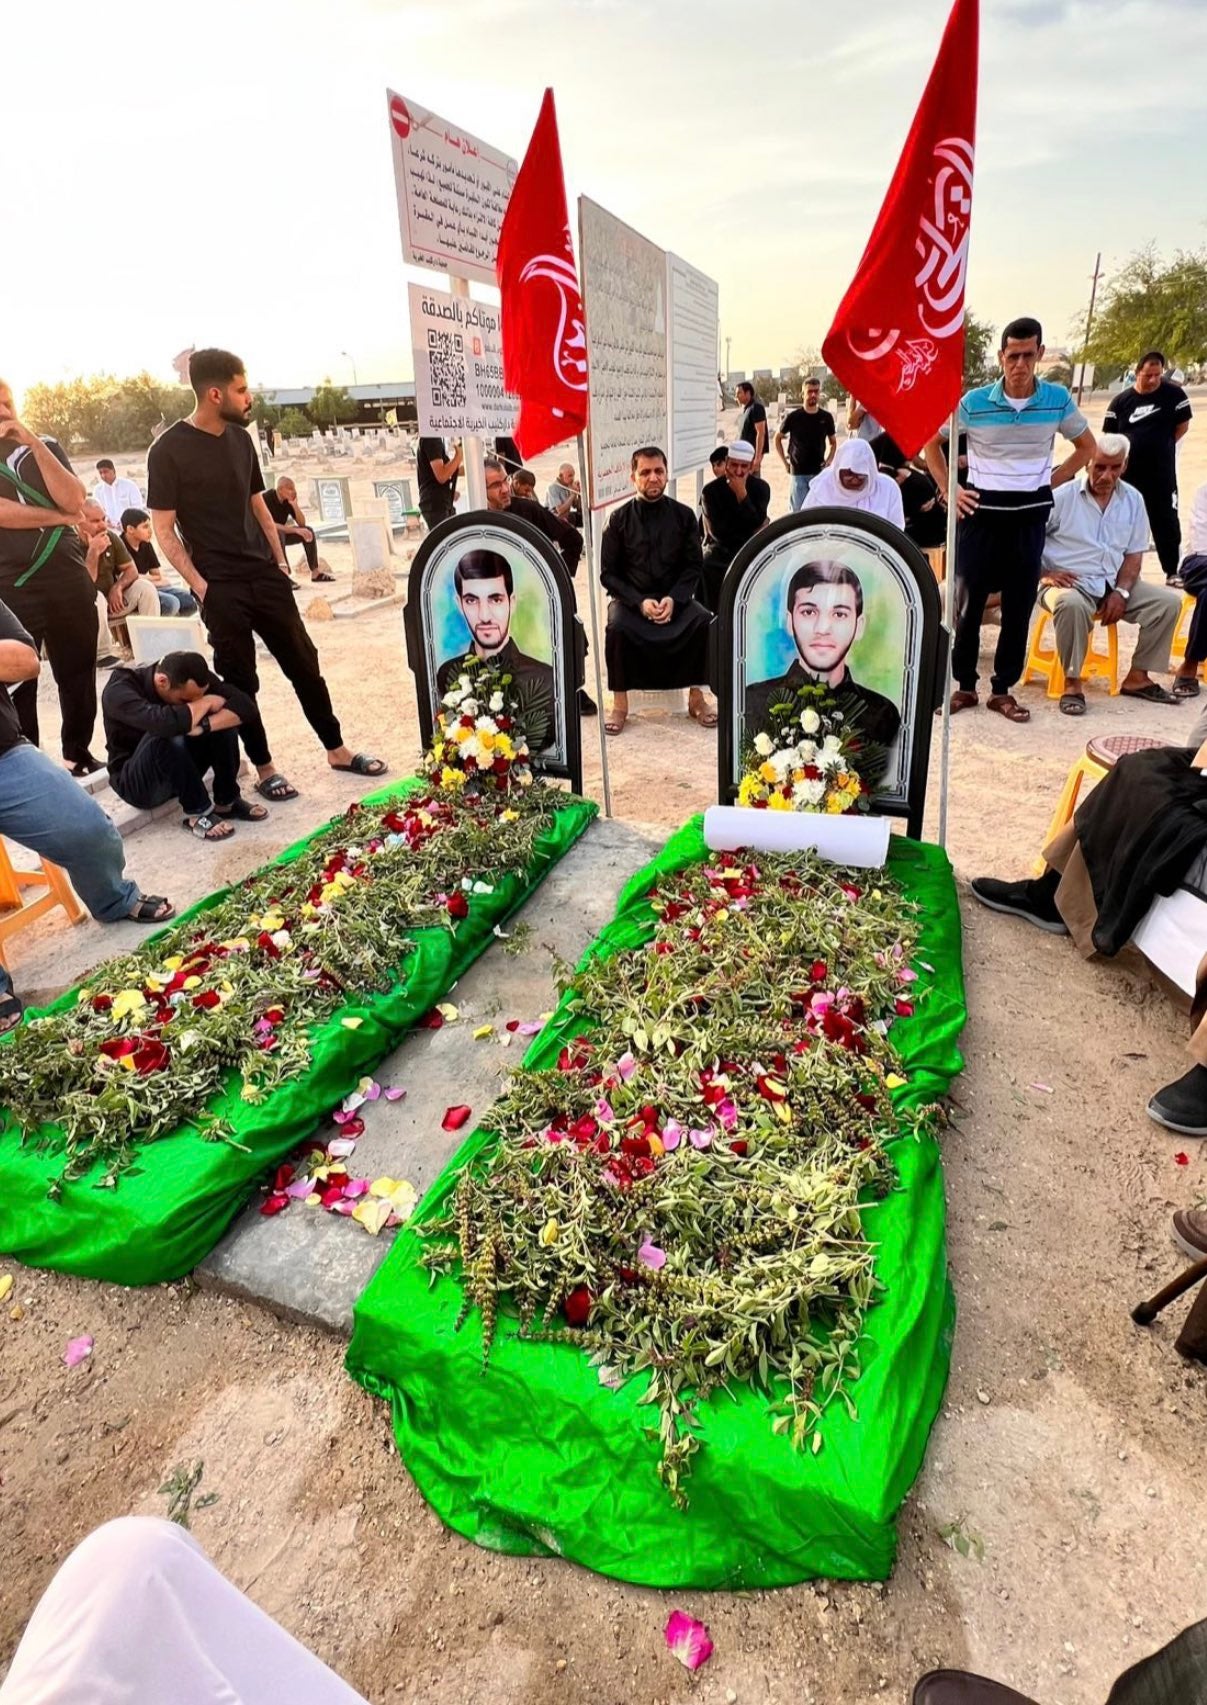 People gather around the symbolic graves of Jaafar Sultan (left) and Sadeq Thamer